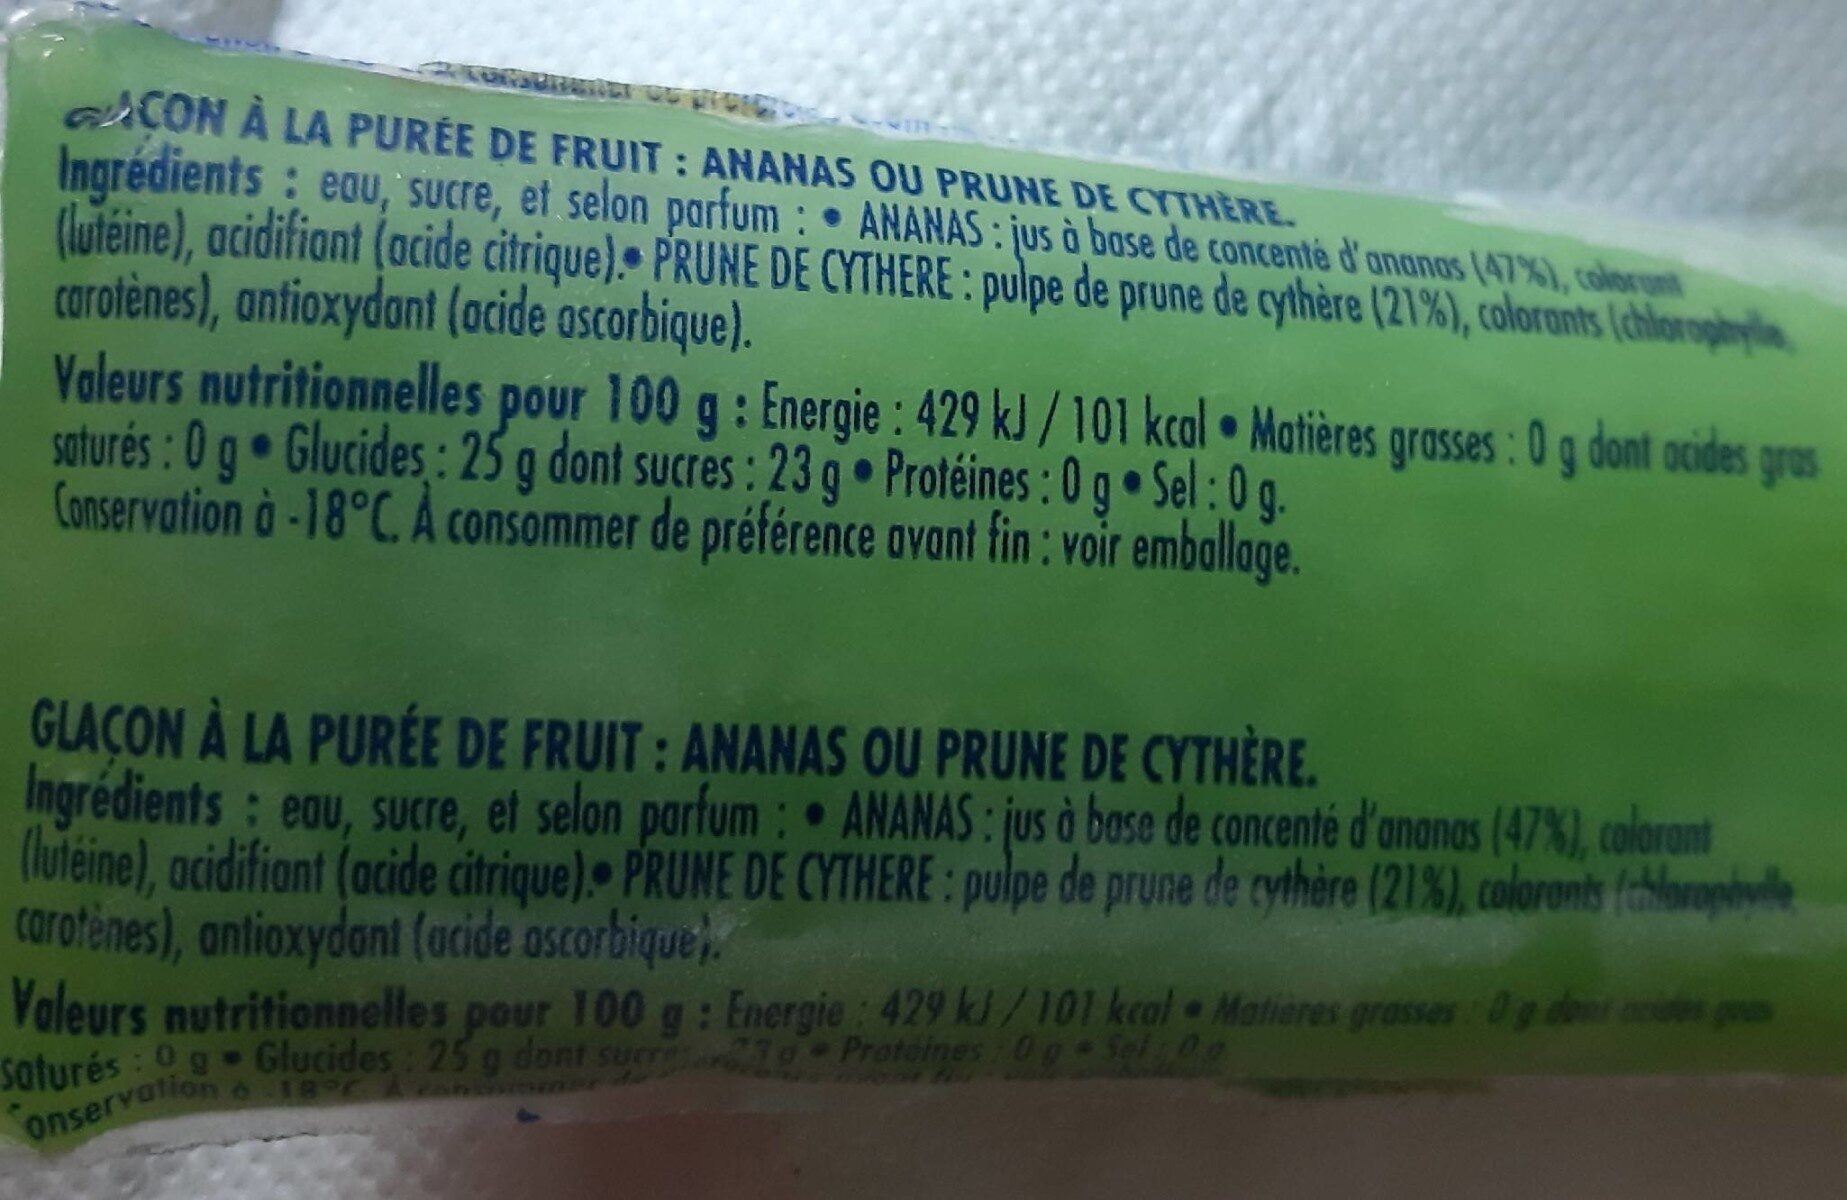 Fruisson, Prune de cythere - Nutrition facts - fr